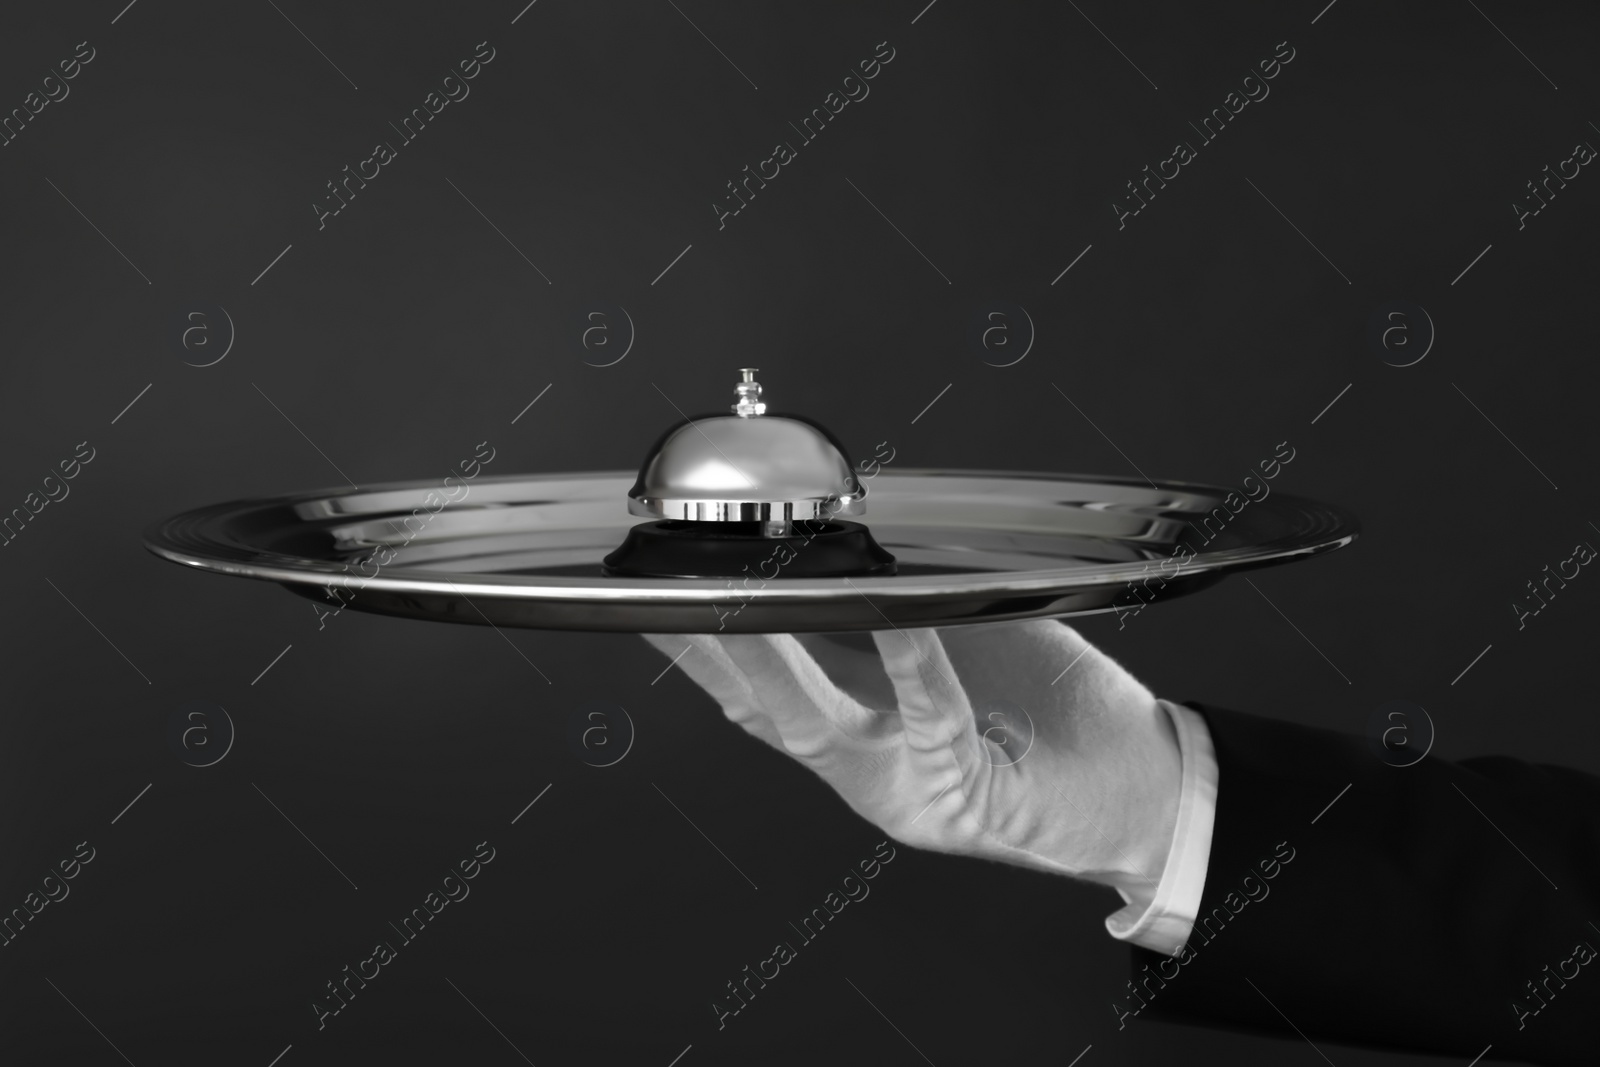 Photo of Butler holding metal tray with service bell on black background, closeup